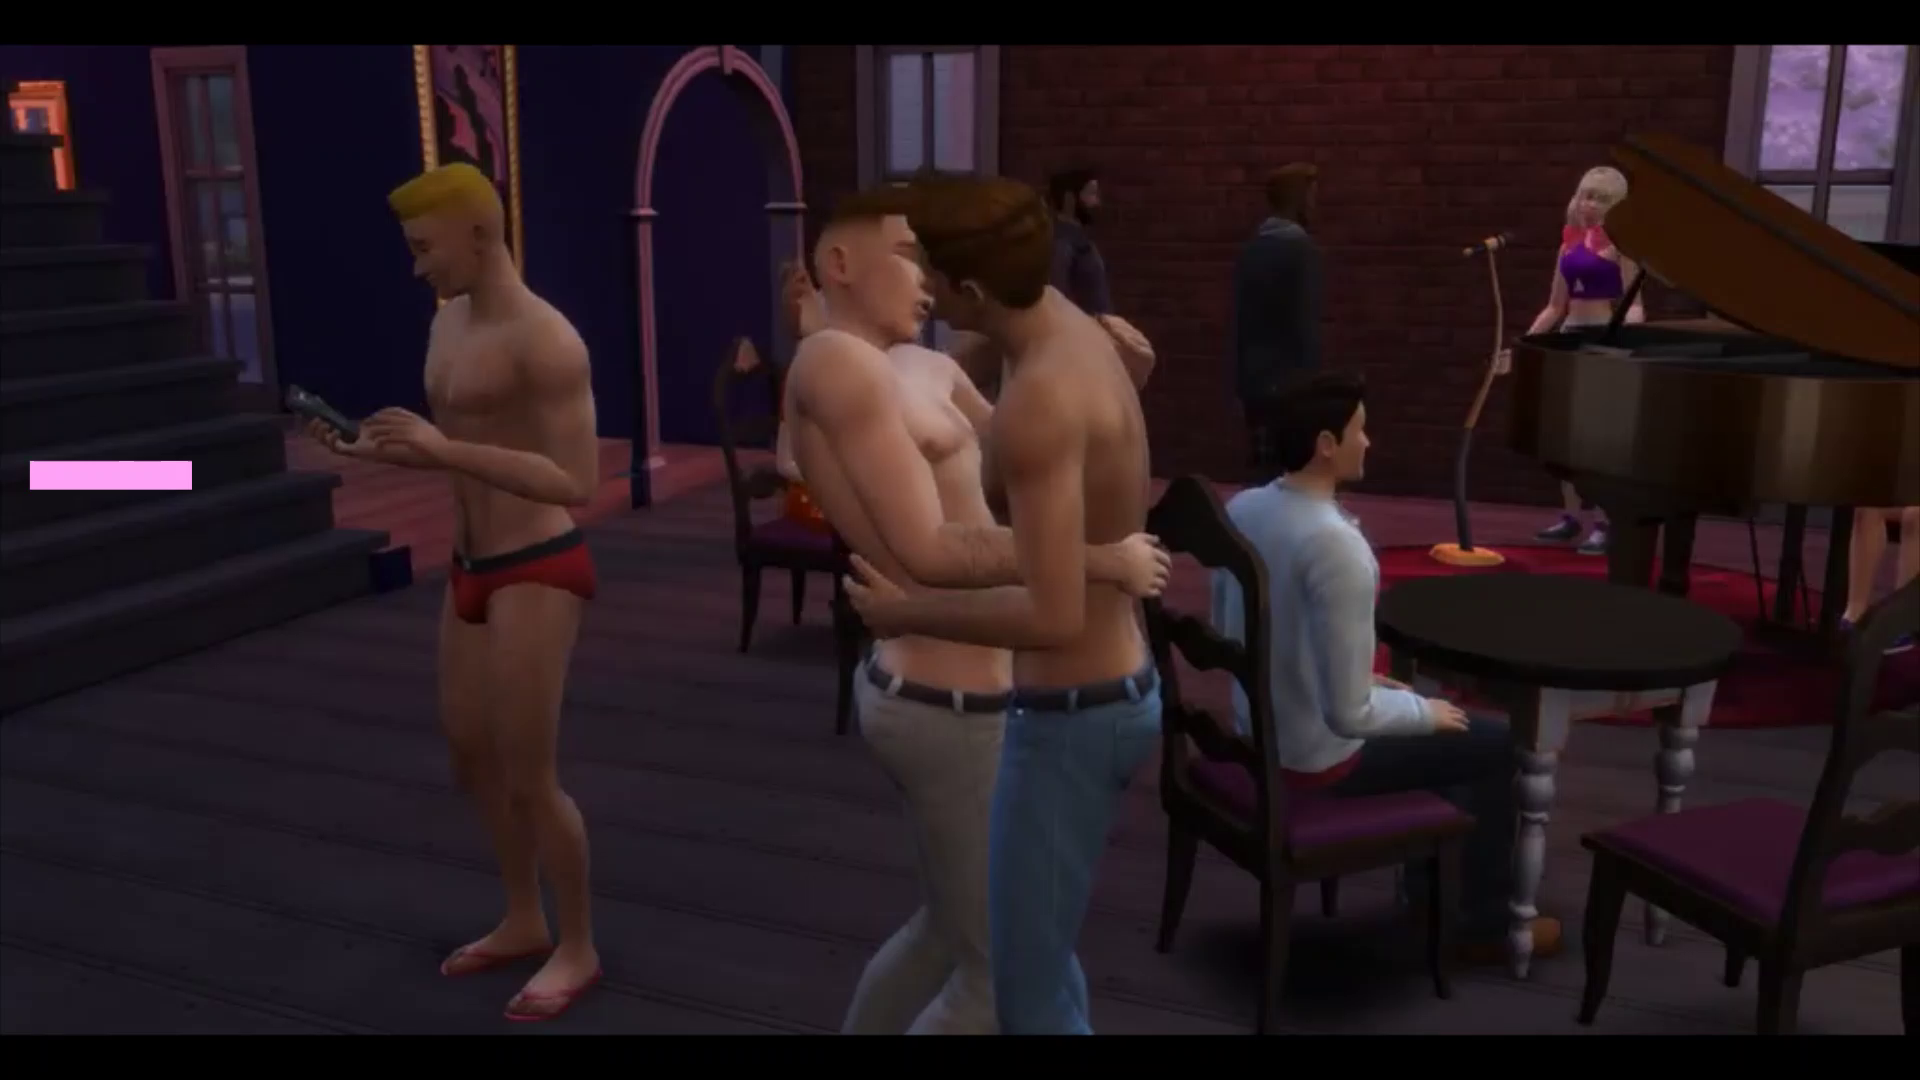 Video post by Sims4Men